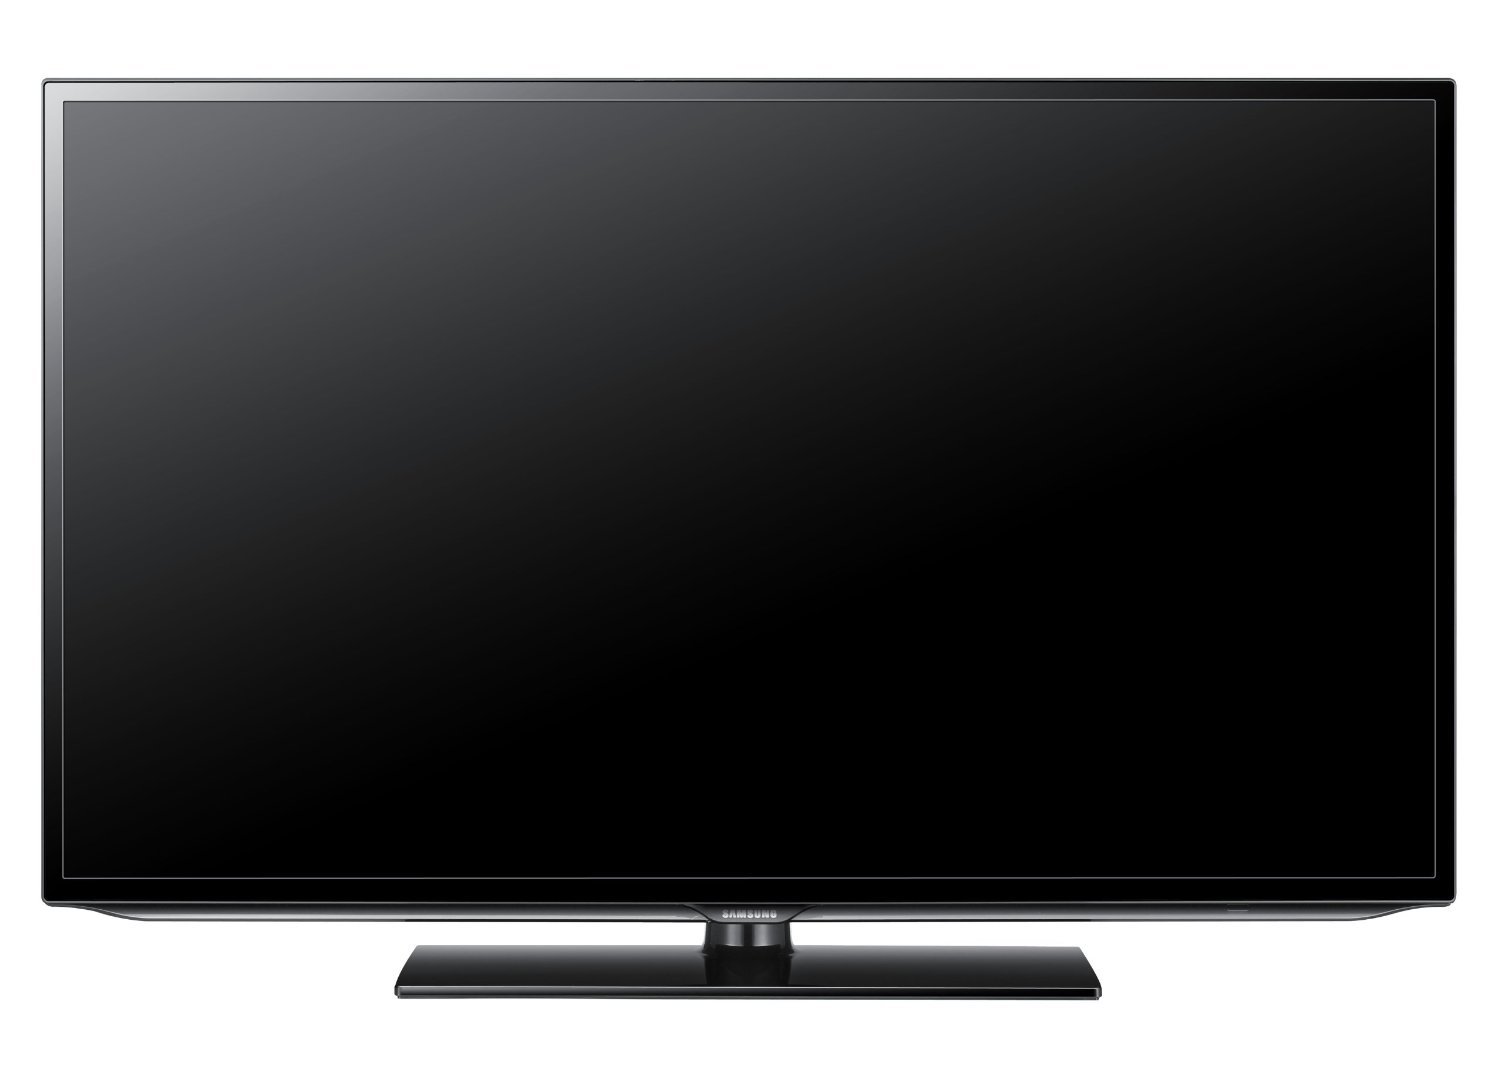 Samsung Eh Best Inch Flat Screen Tv Led 4 Wallpaper with 1500x1072 1500x1072